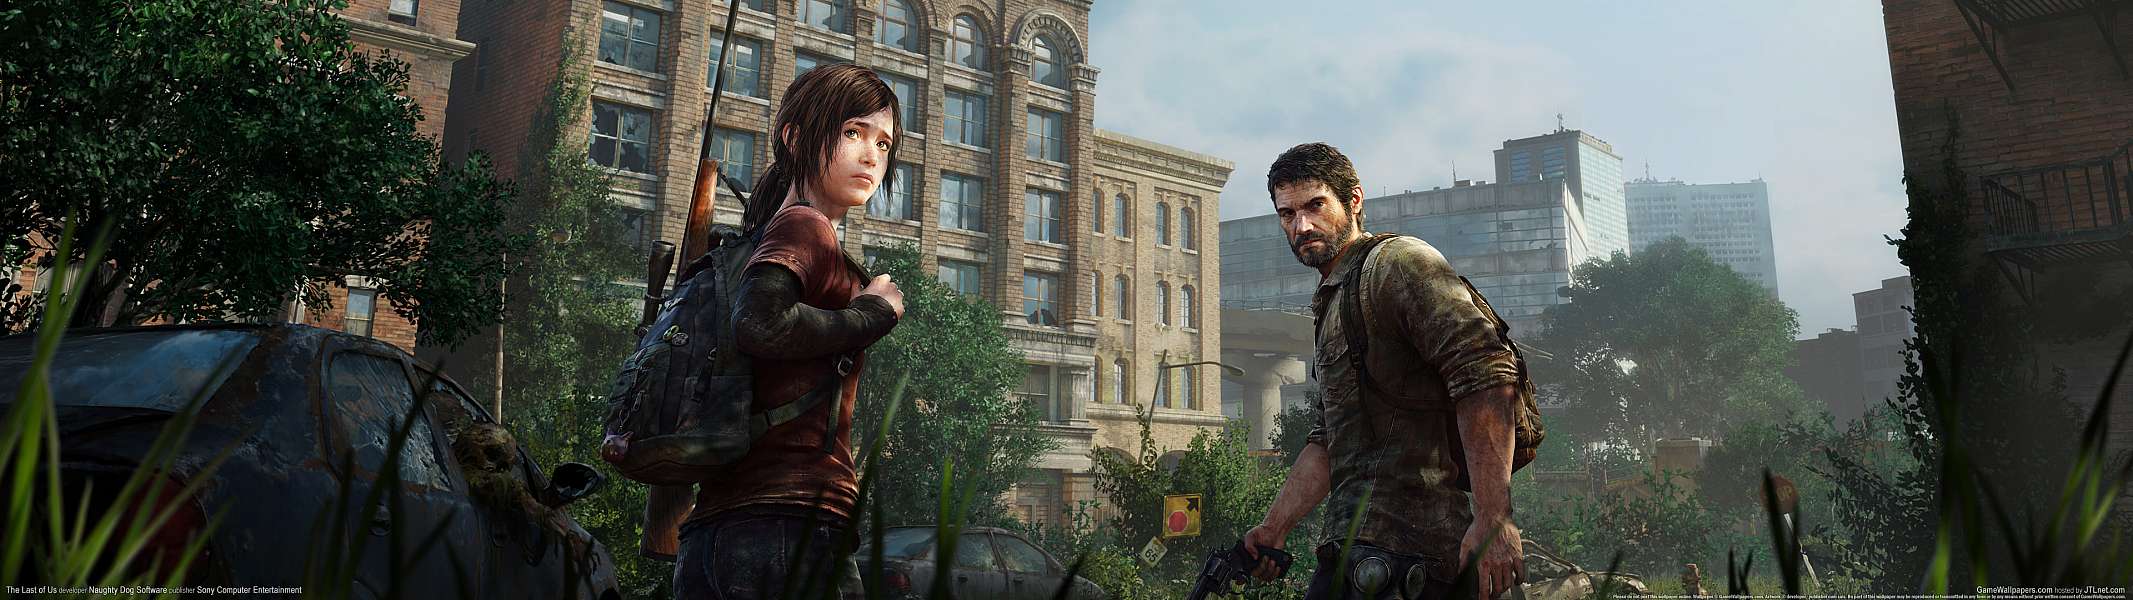 The Last of Us dual screen wallpaper or background